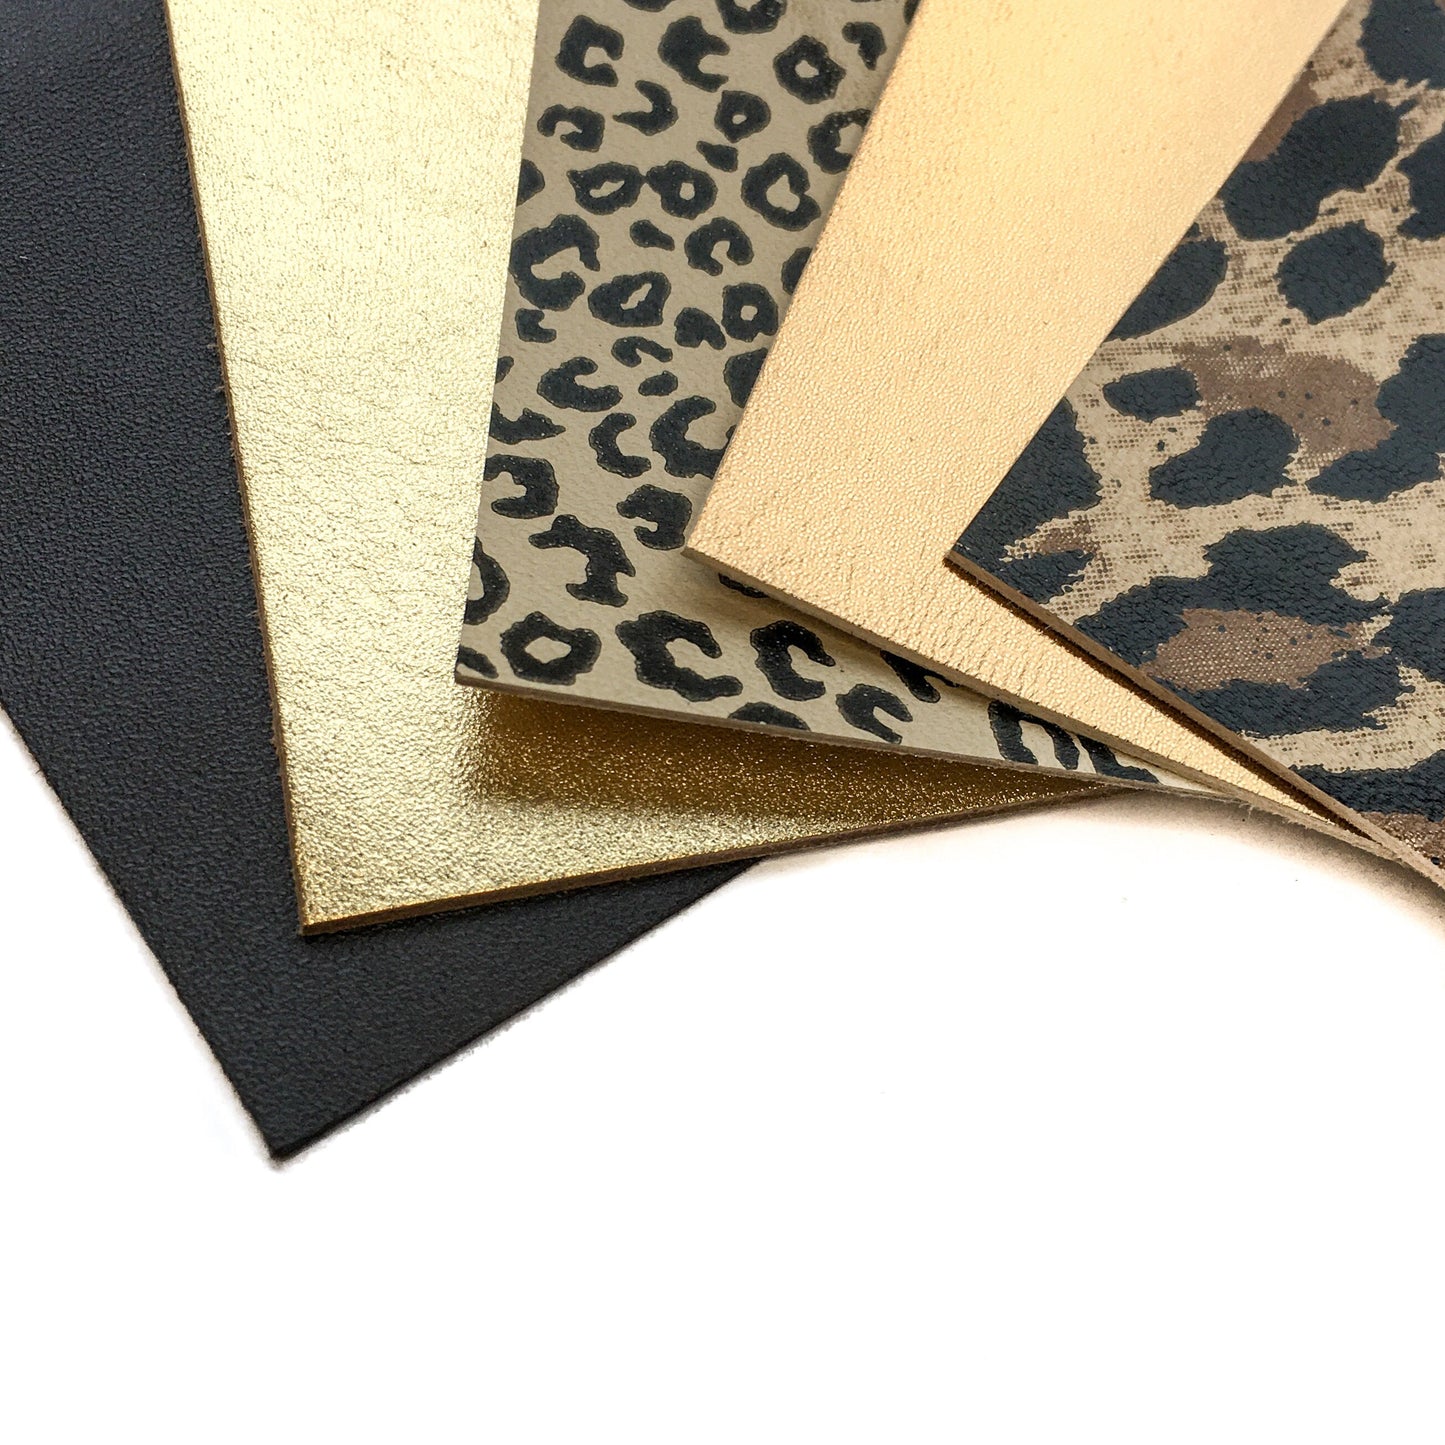 Five Leather Pieces -Gold, Leopard, Cheetah, Bronze, Brown 5x5in